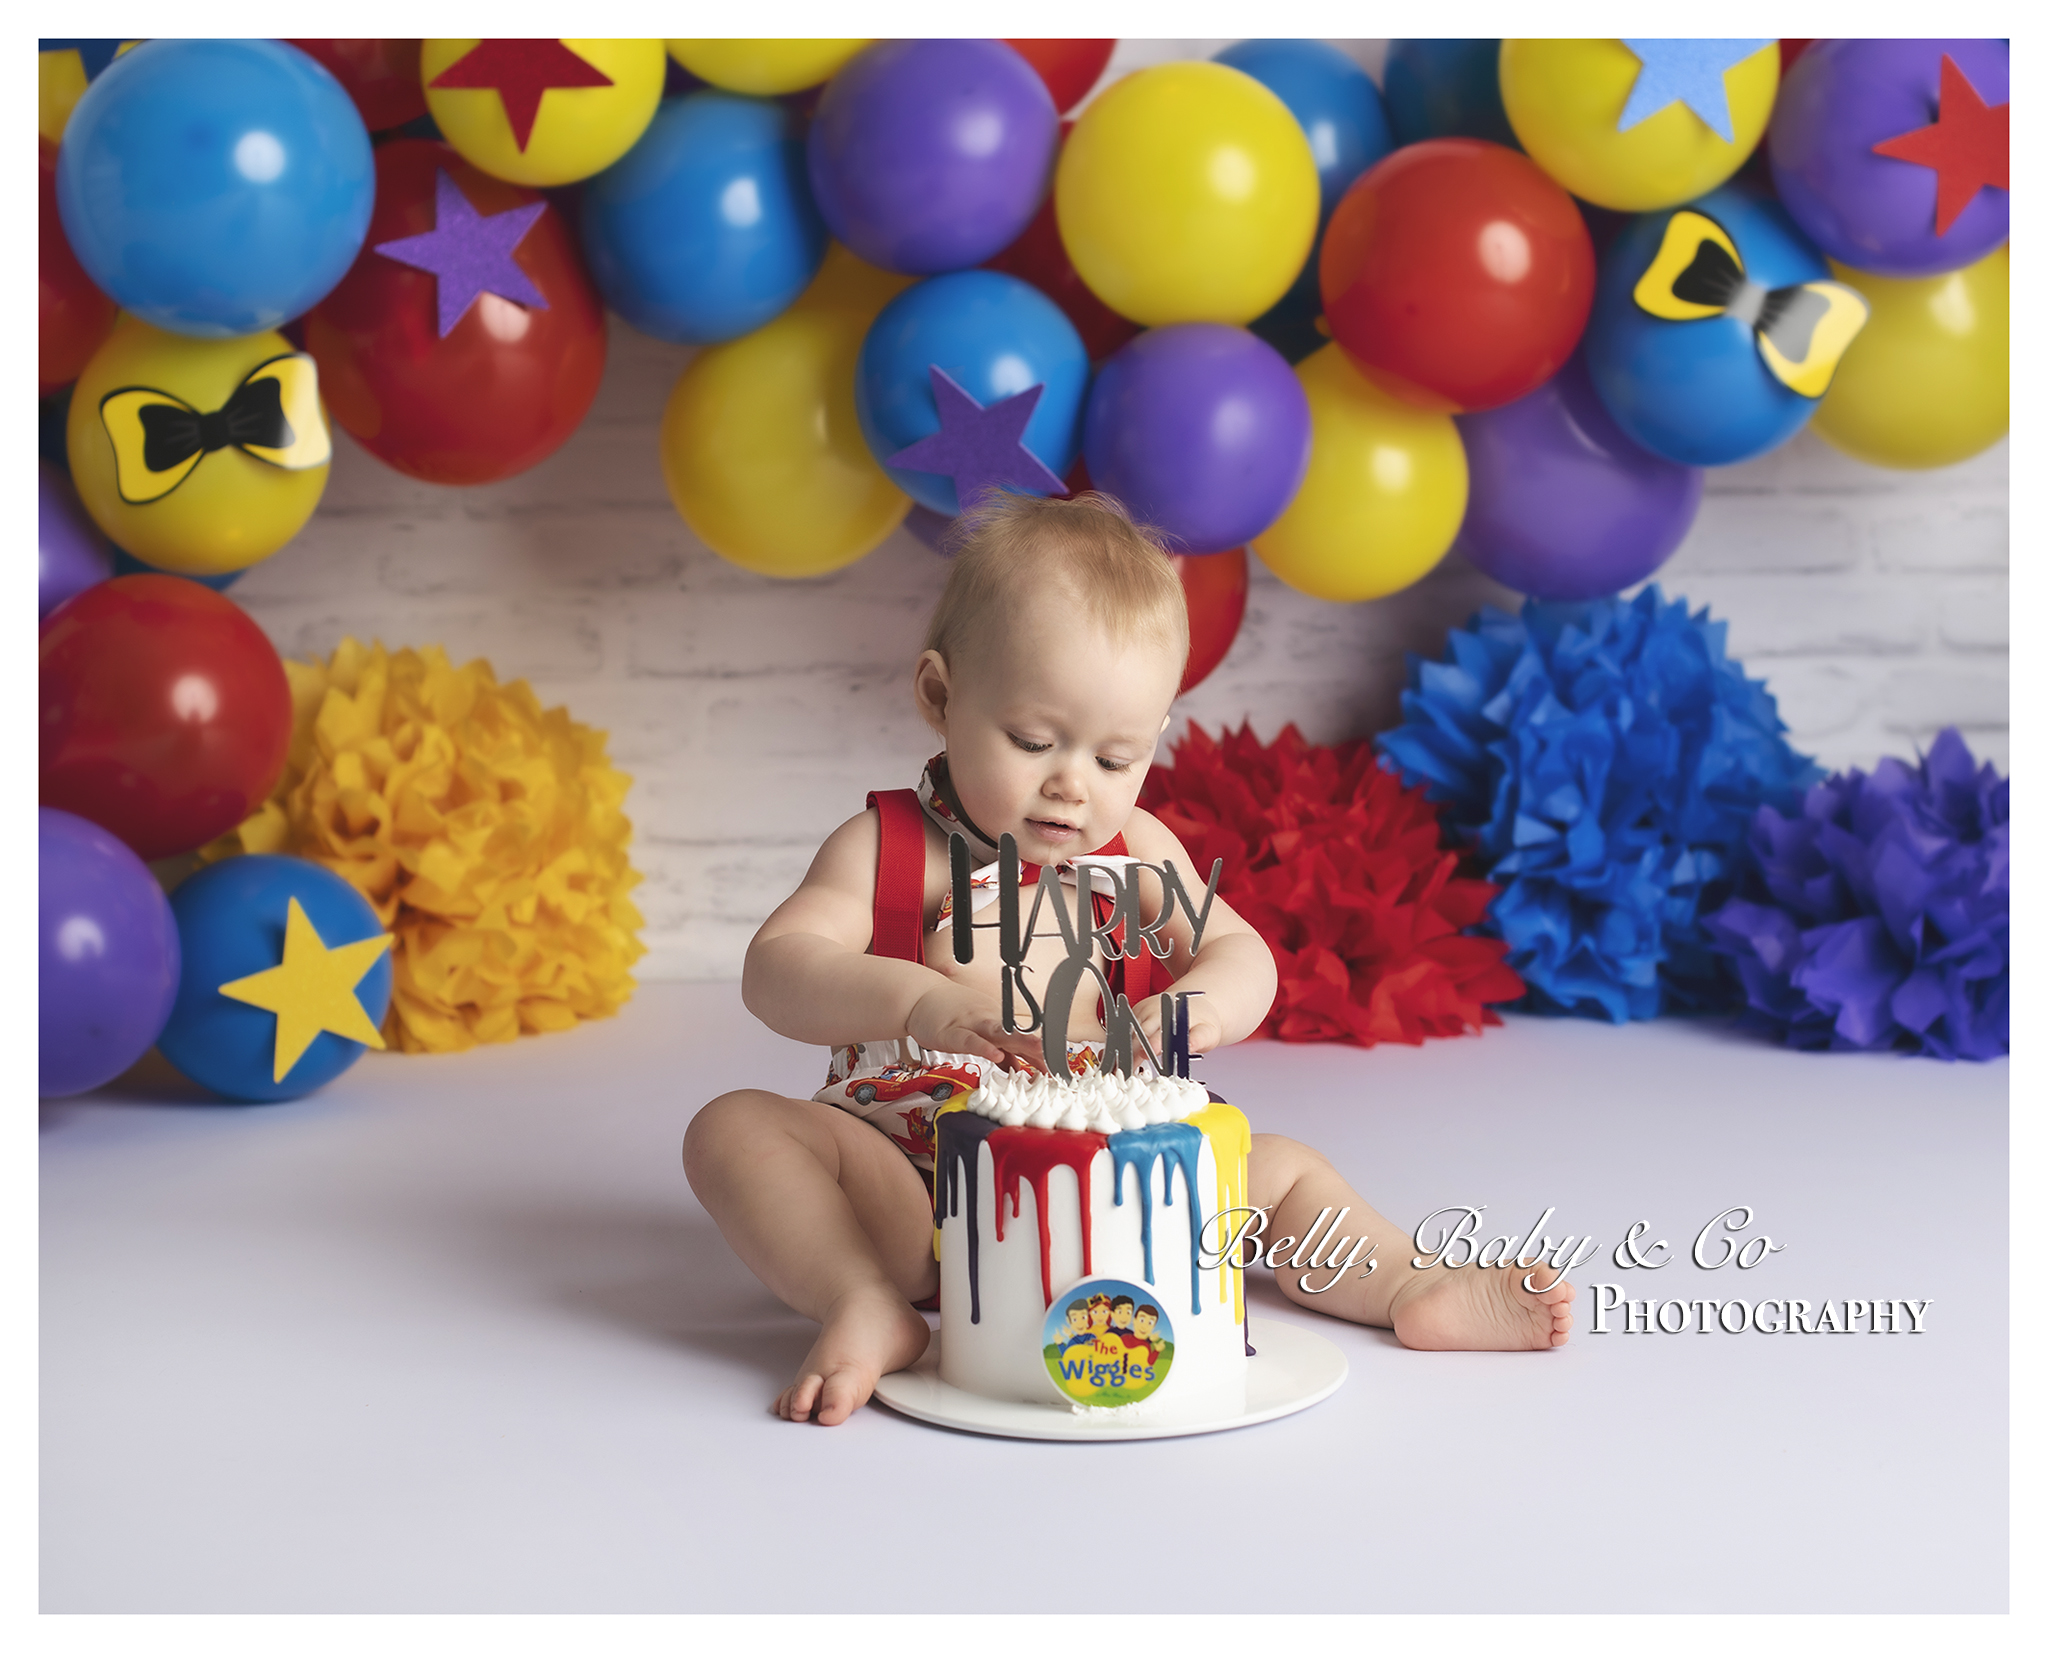 Belly Baby Co Photography. Top 10 Best Cake Smash Photographers in the World - 36